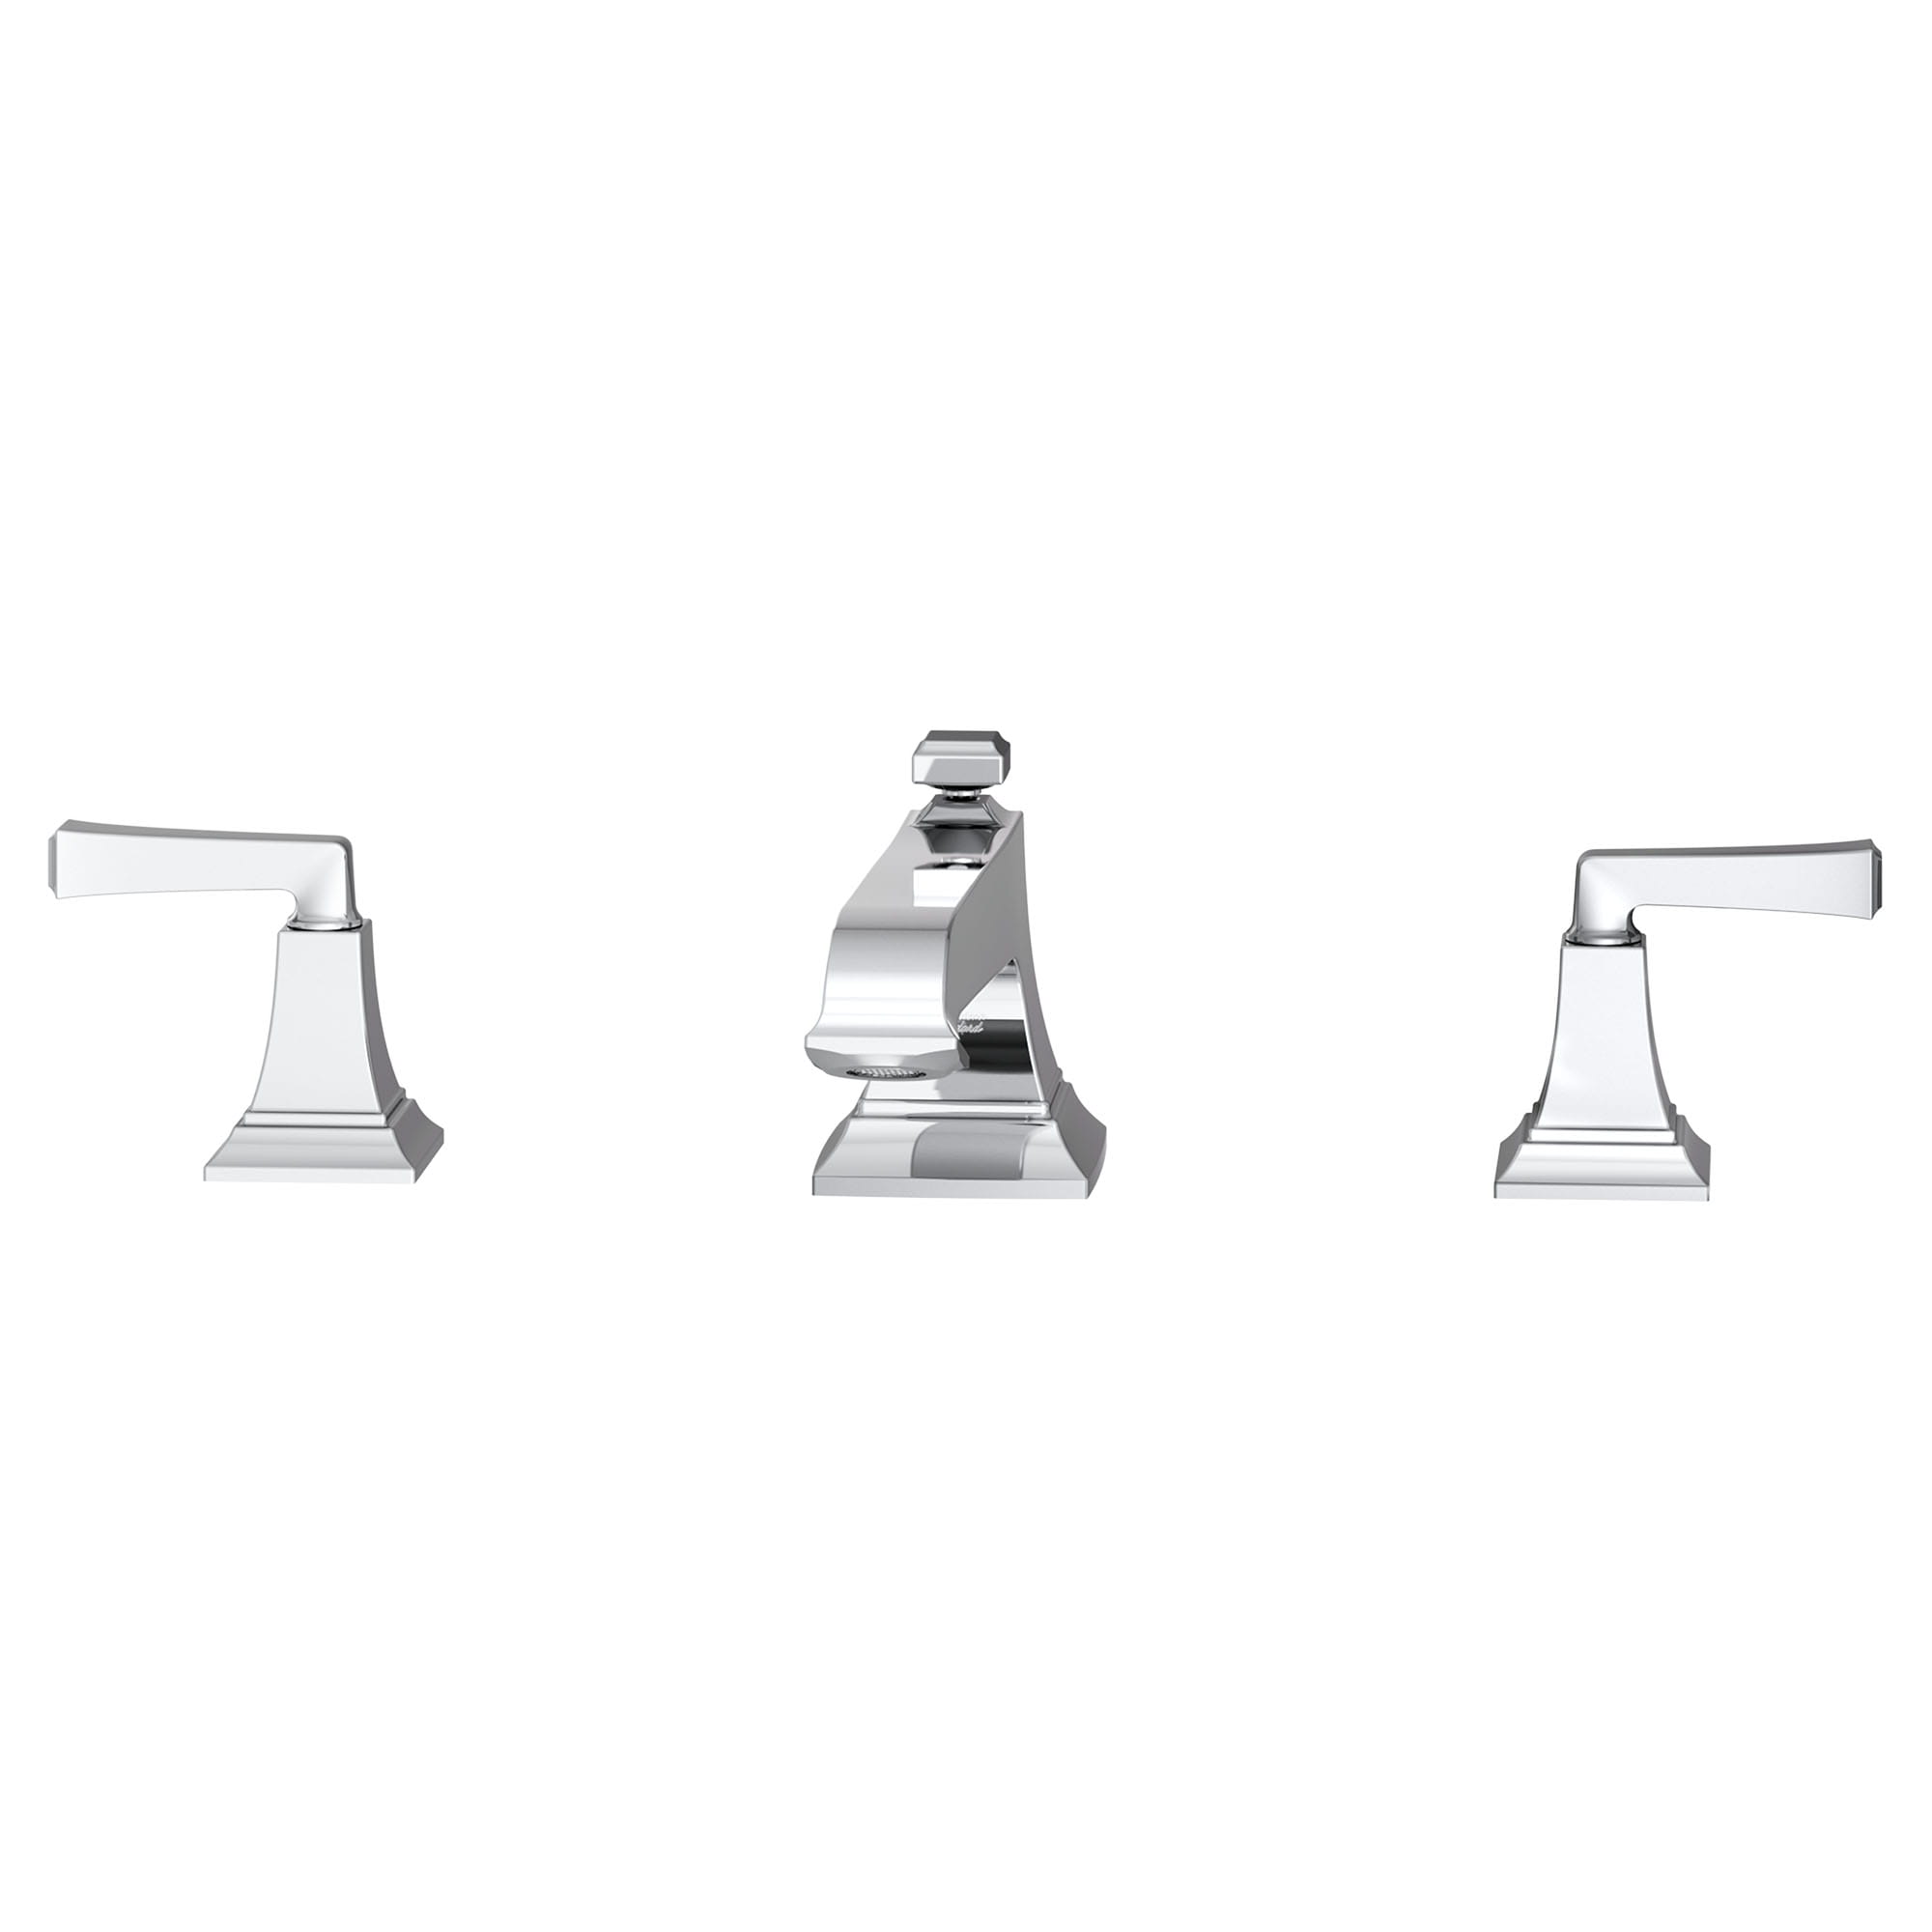 Town Square S Bathub Faucet With Lever Handles for Flash Rough In Valve CHROME